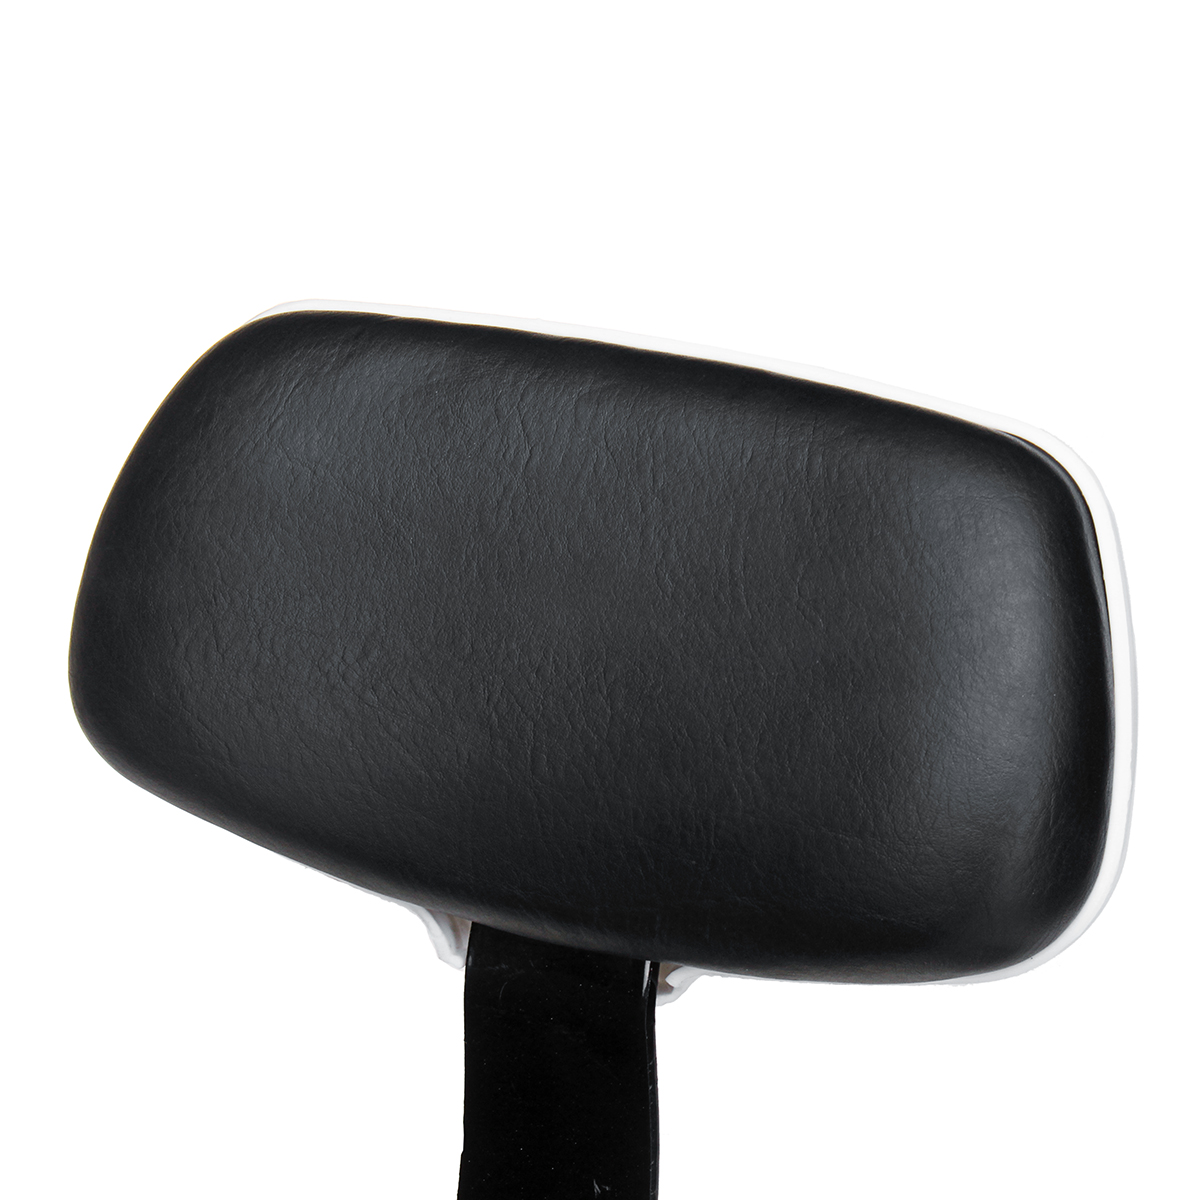 Scooter Seat Cushion Comfort Gel Rear Tricycle Electric Vehicle Bike Saddle W/ Back Rest Support - Auto GoShop